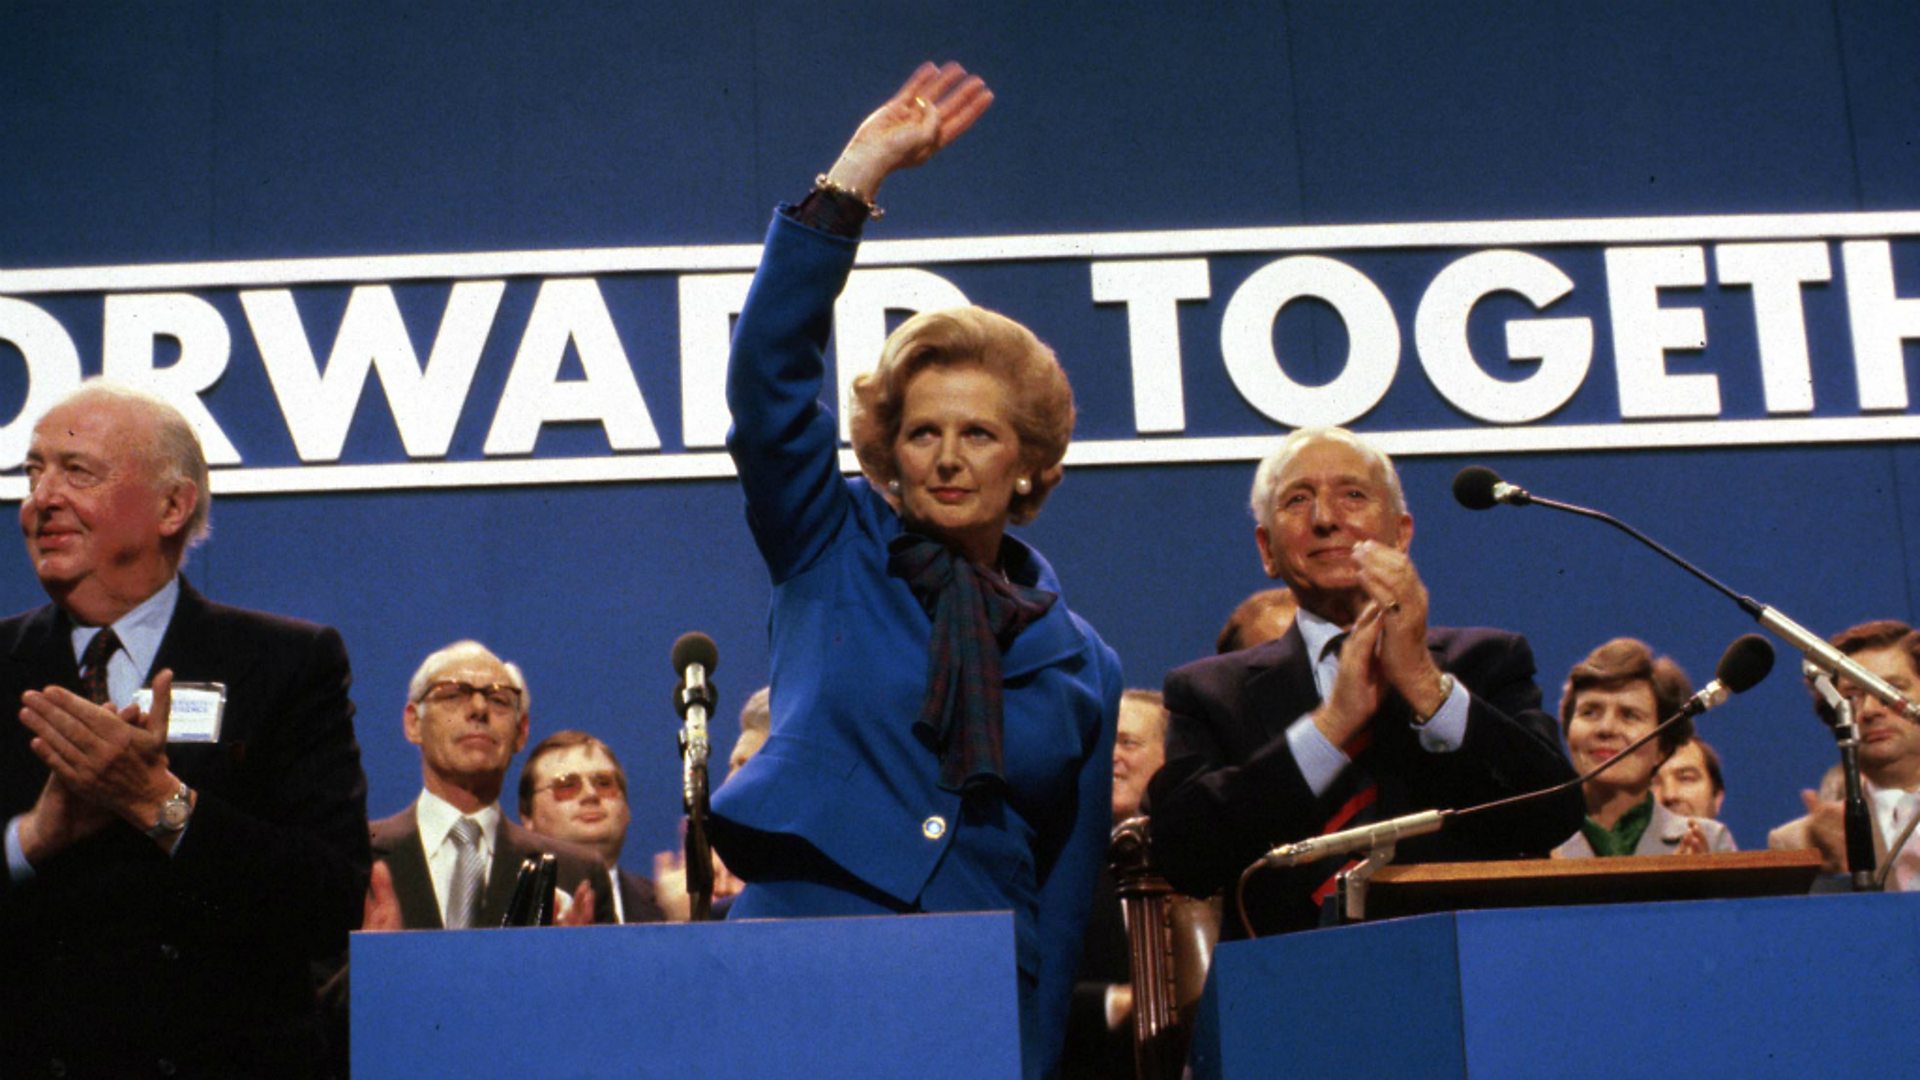 Margaret Thatcher, former British Prime Minister, at the 1983 Conservative Convention